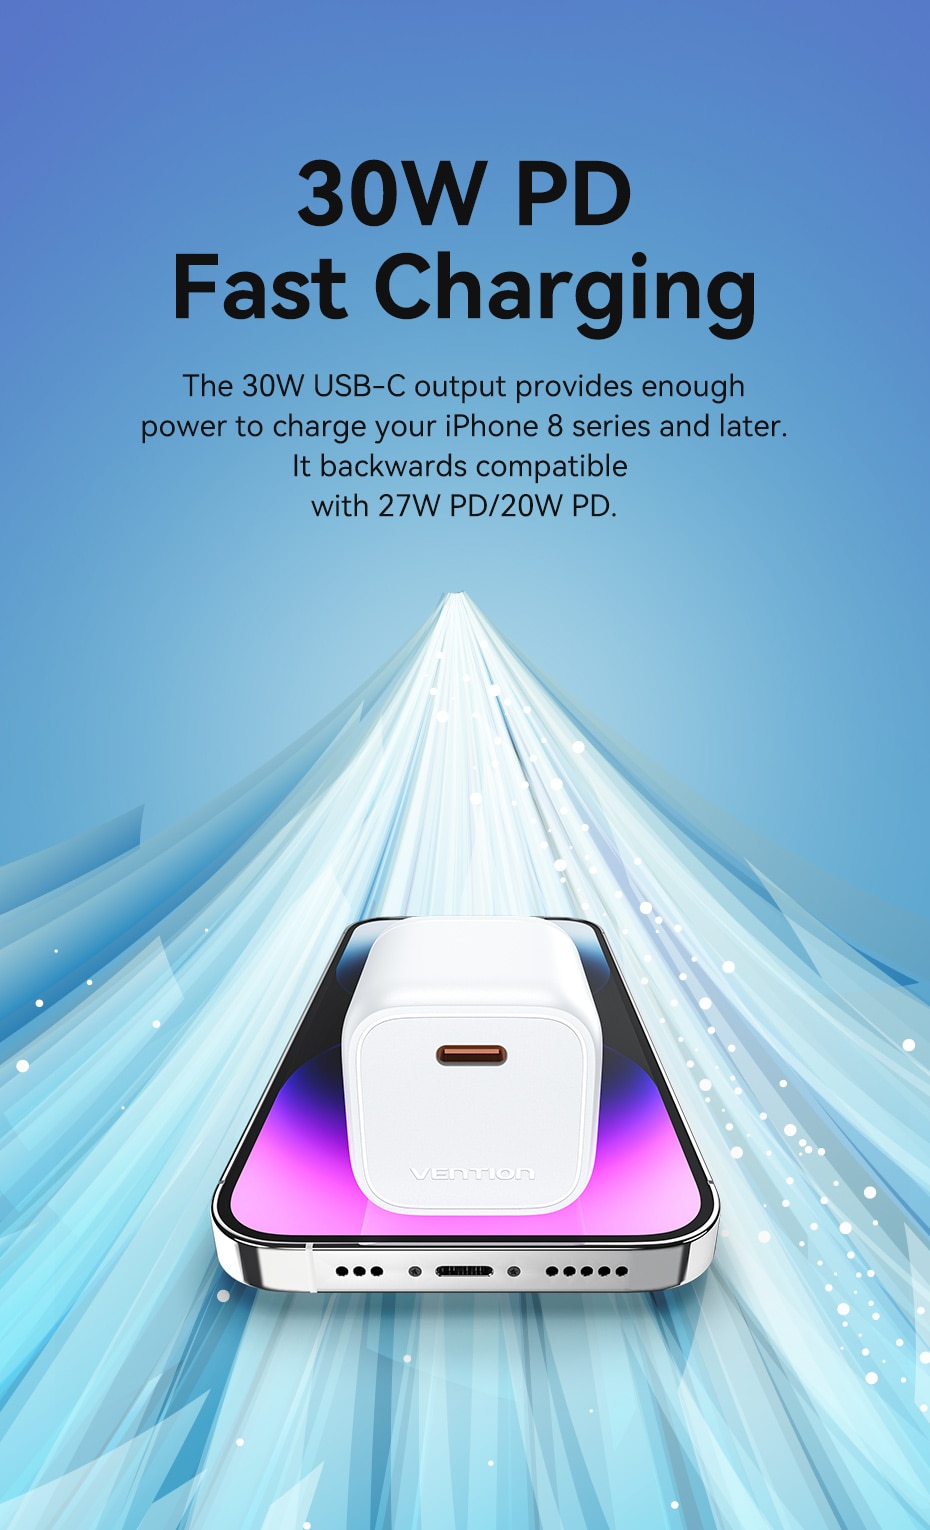 Vention GeN Fast Charger Type-C 30W Wall Charger